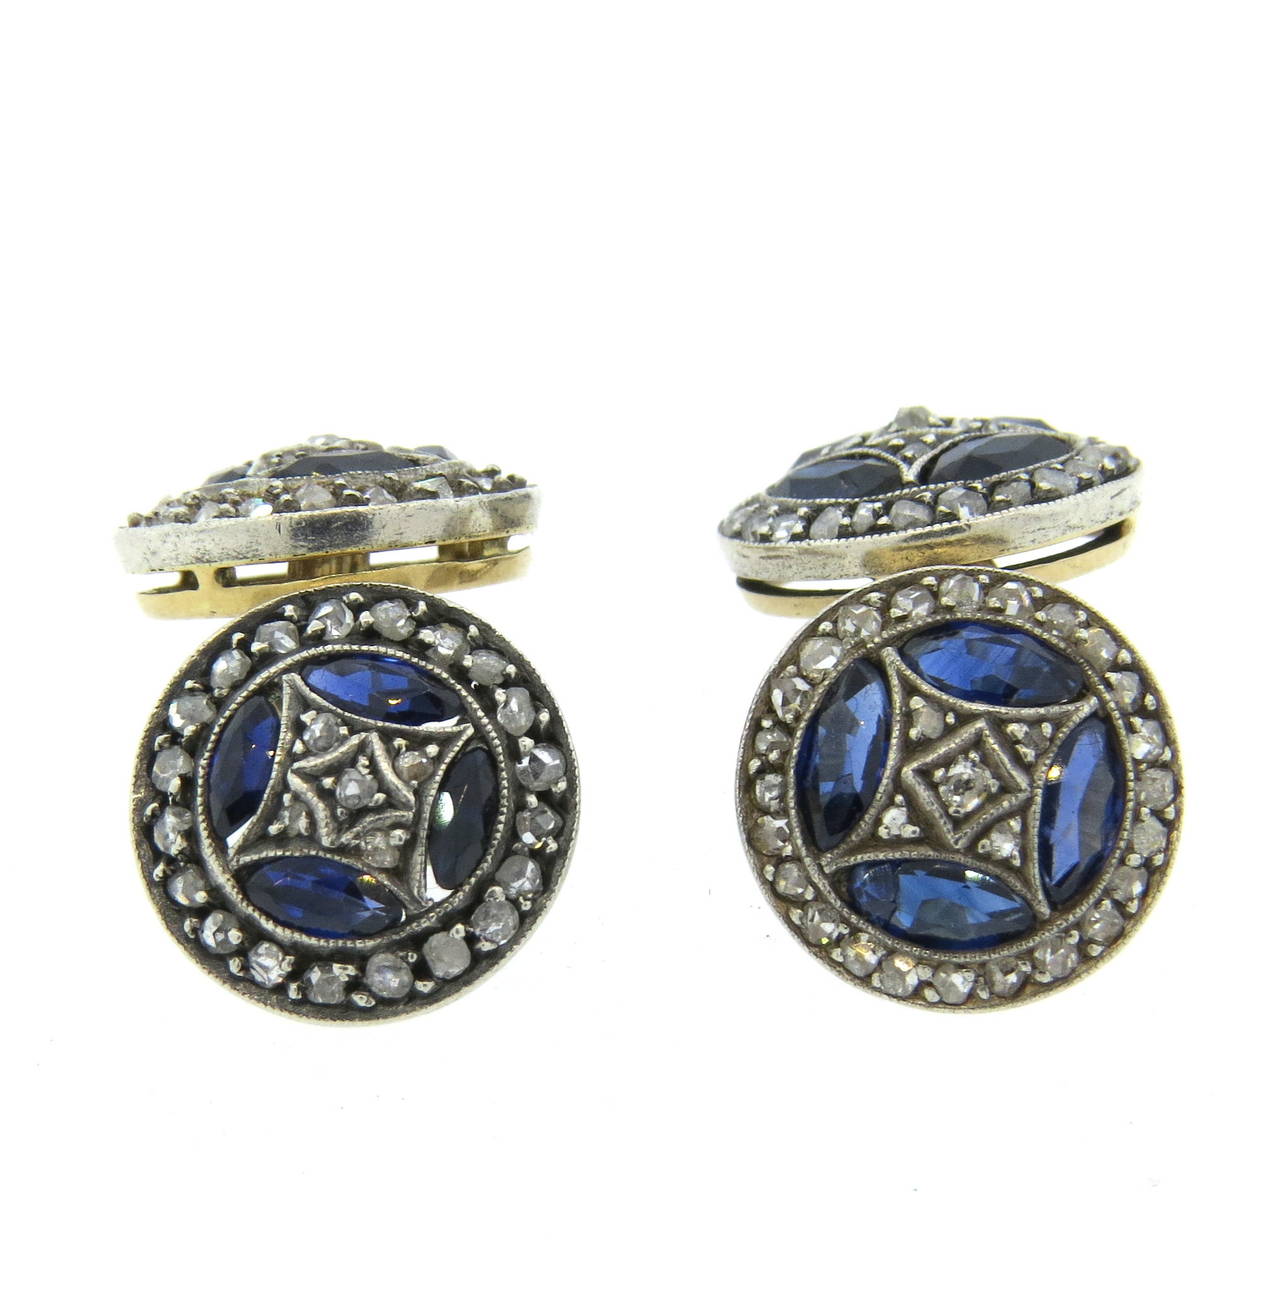 Antique 14k gold cufflinks, adorned with rose cut diamonds and blue sapphires. Tops measure 12mm in diameter. Weight - 6.3 grams